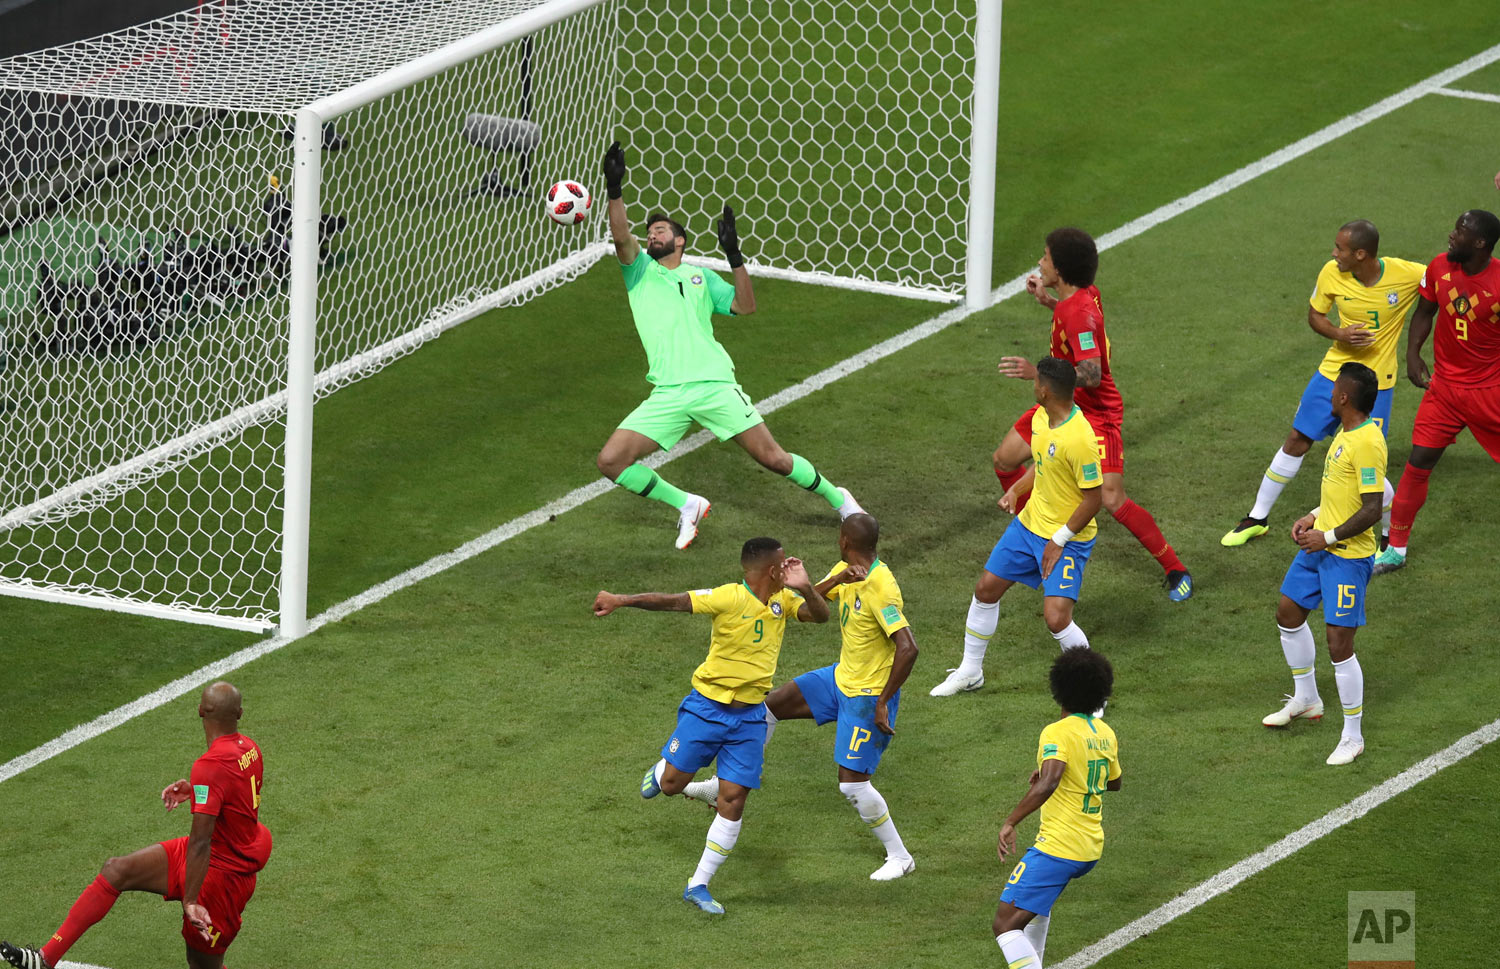  Brazil goalkeeper Alisson, center, fails to stop Belgium's first goal during the quarterfinal match between Brazil and Belgium at the 2018 soccer World Cup in the Kazan Arena, in Kazan, Russia, Friday, July 6, 2018. (AP Photo/Thanassis Stavrakis) 